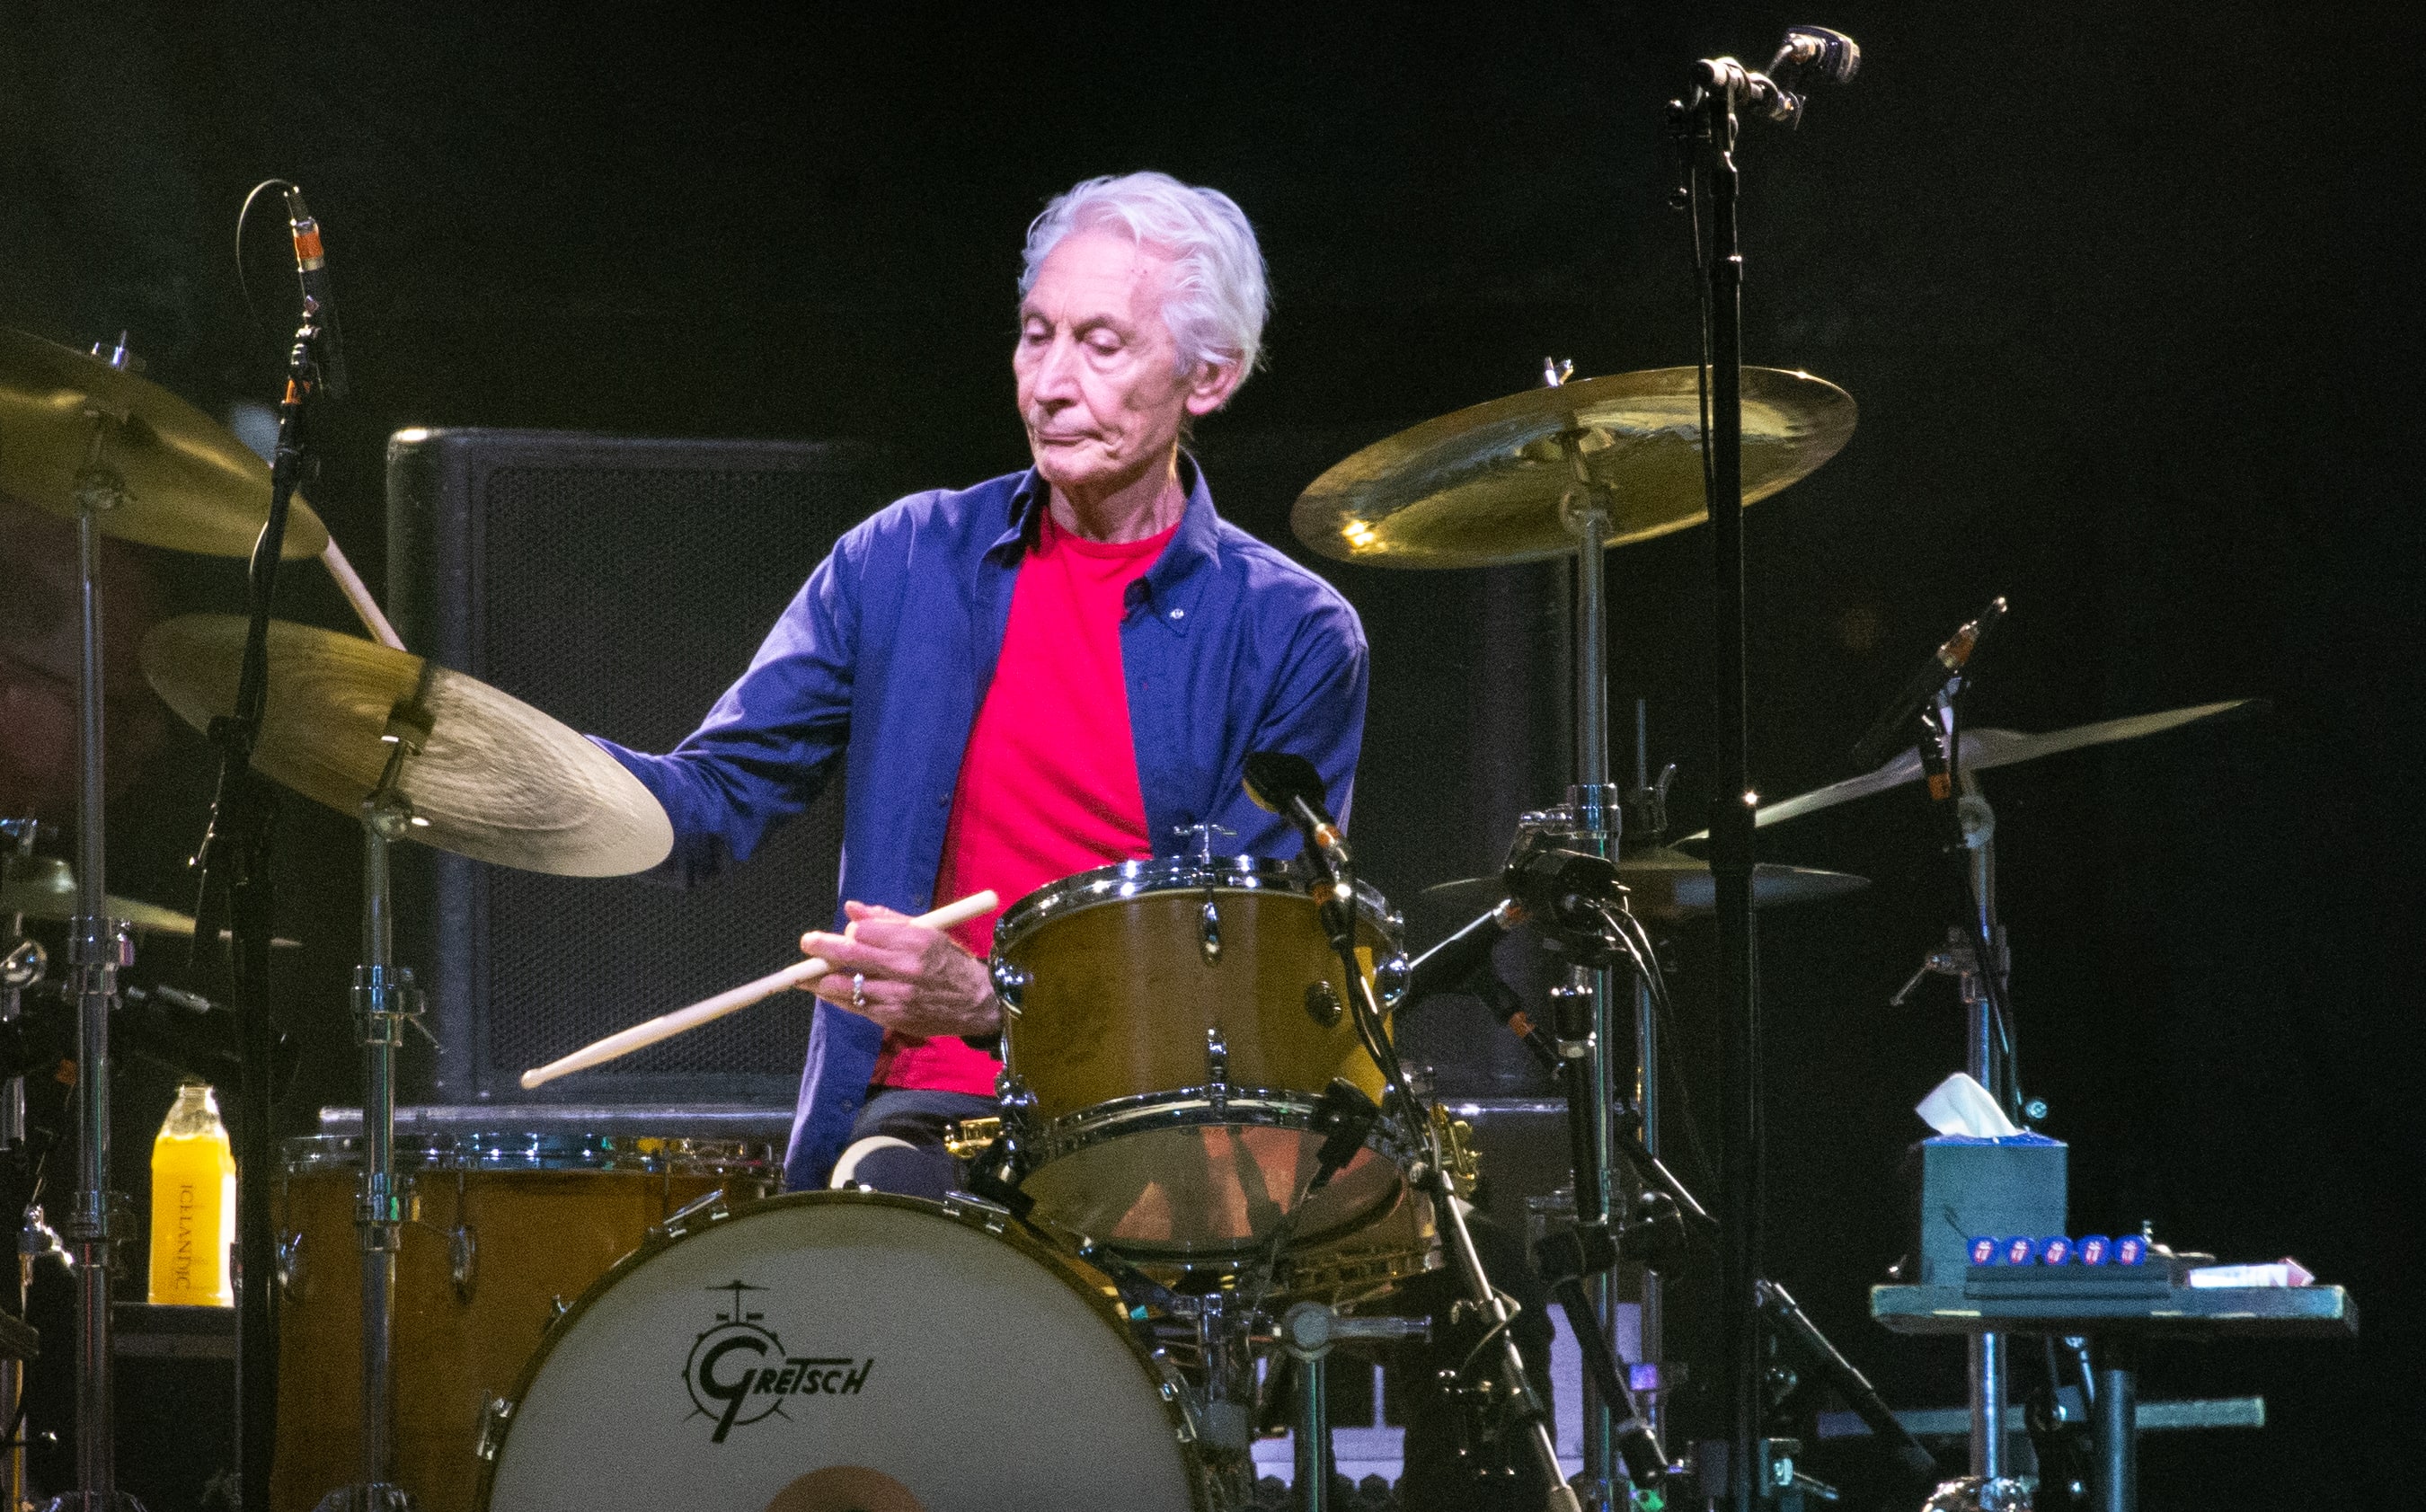 Rolling Stones drummer Charlie Watts performs on stage during their "No Filter" tour at NRG Stadium in Houston, Texas, July 2019.